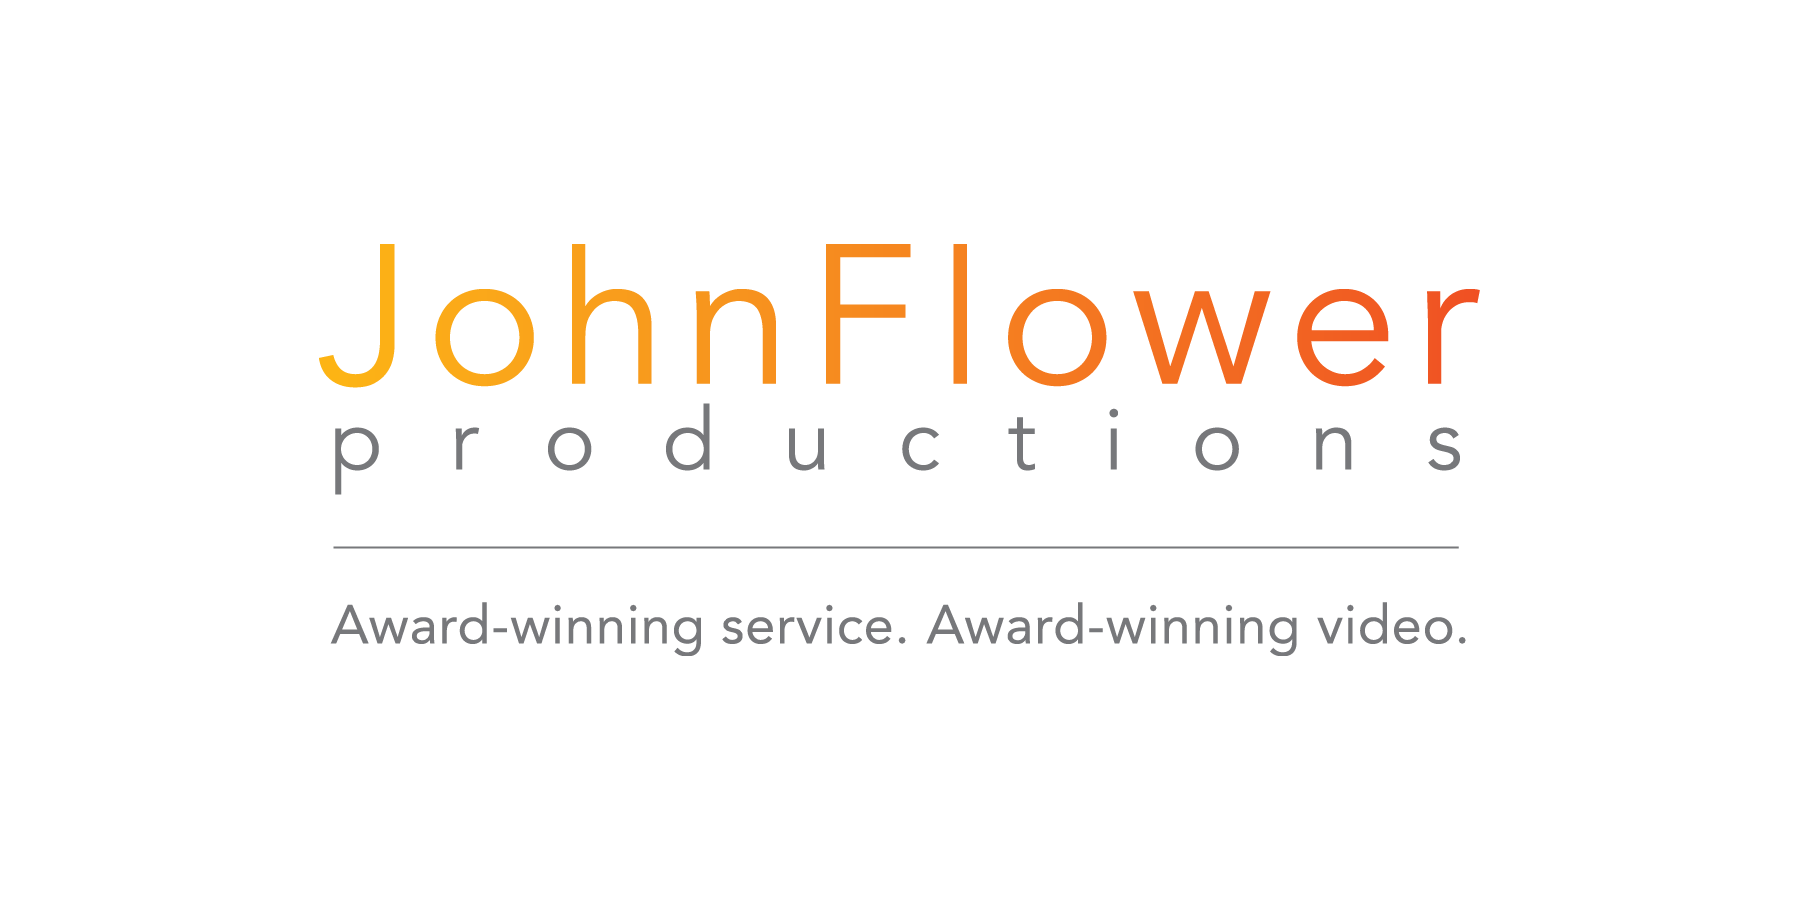 John Flower production needs actors for commercial shoot